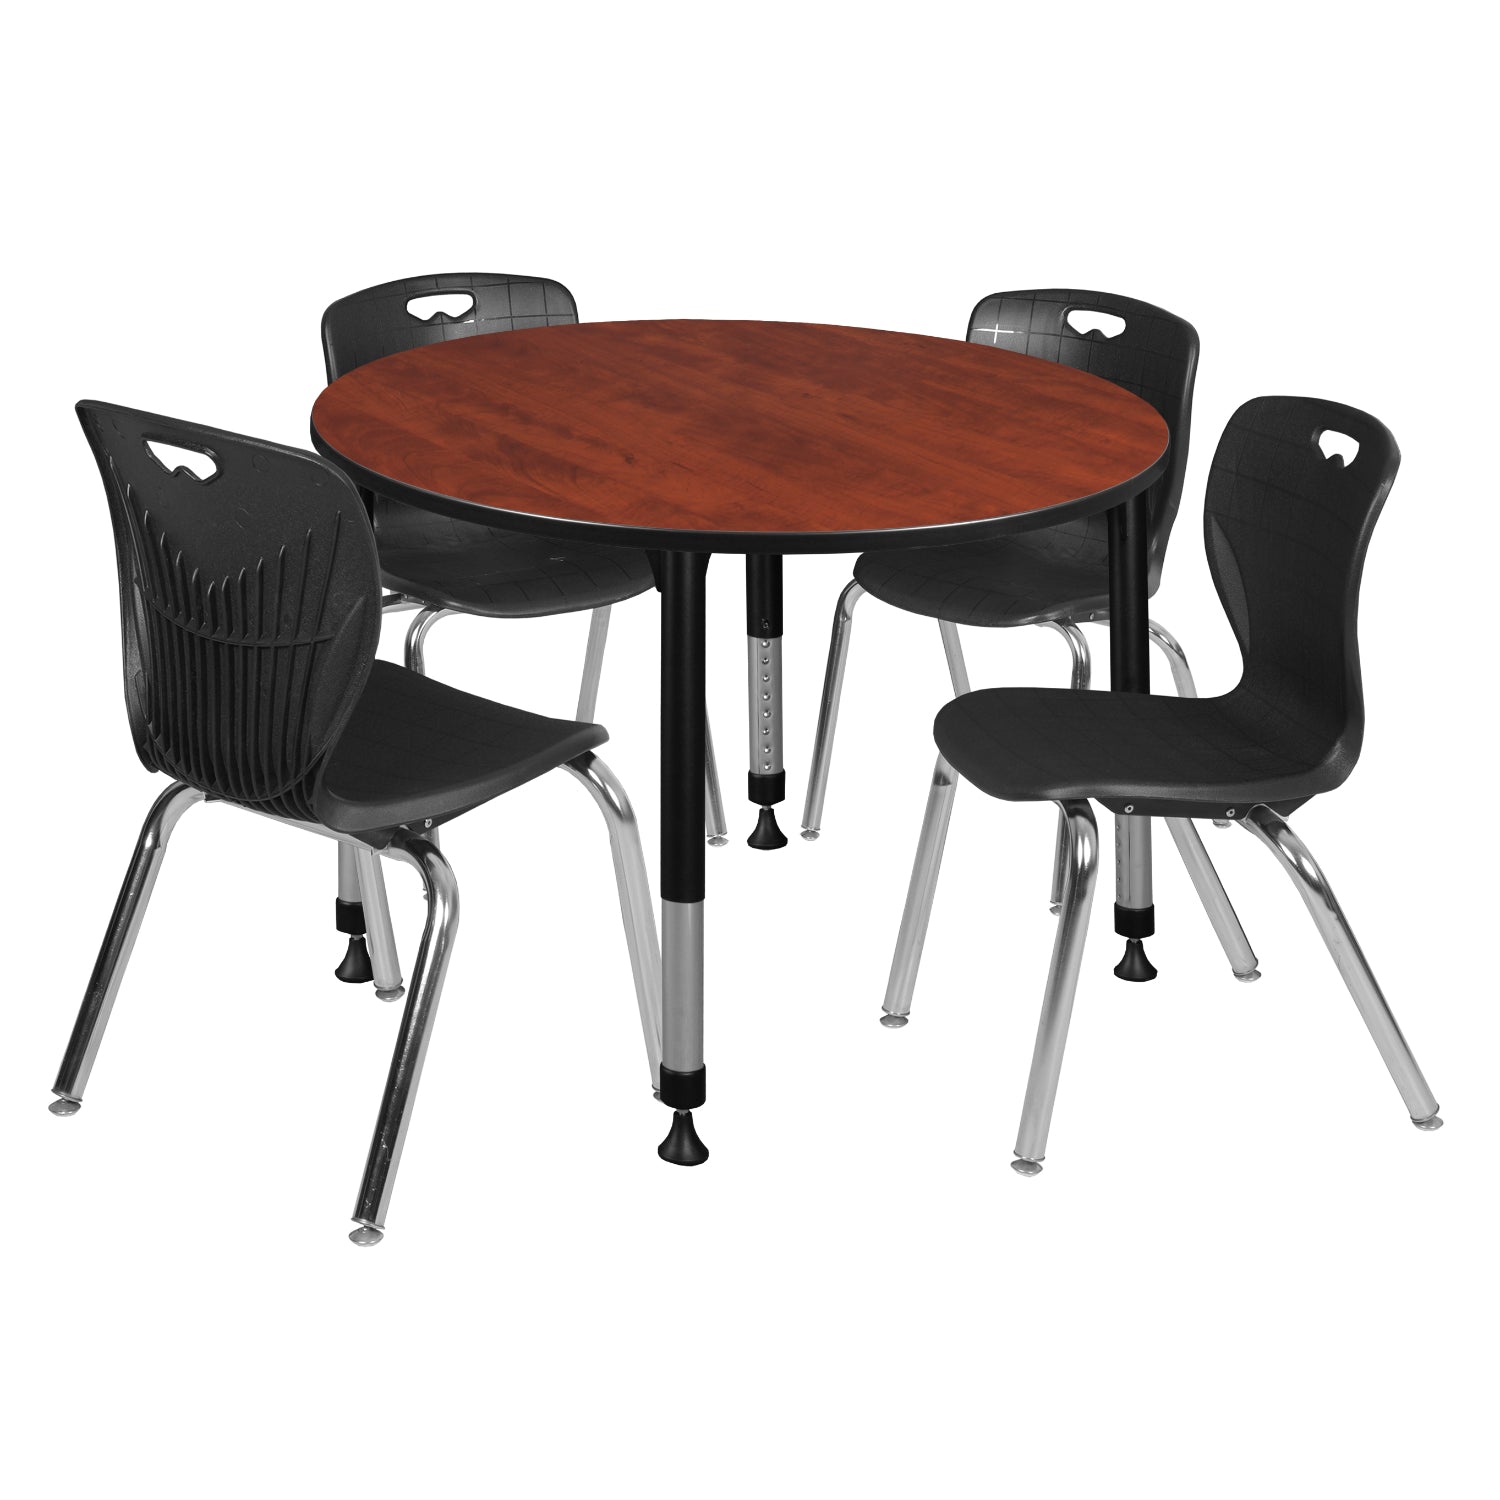 Kee Classroom Table and Chair Package, Kee 48" Round Adjustable Height Table with 4 Andy 18" Stack Chairs